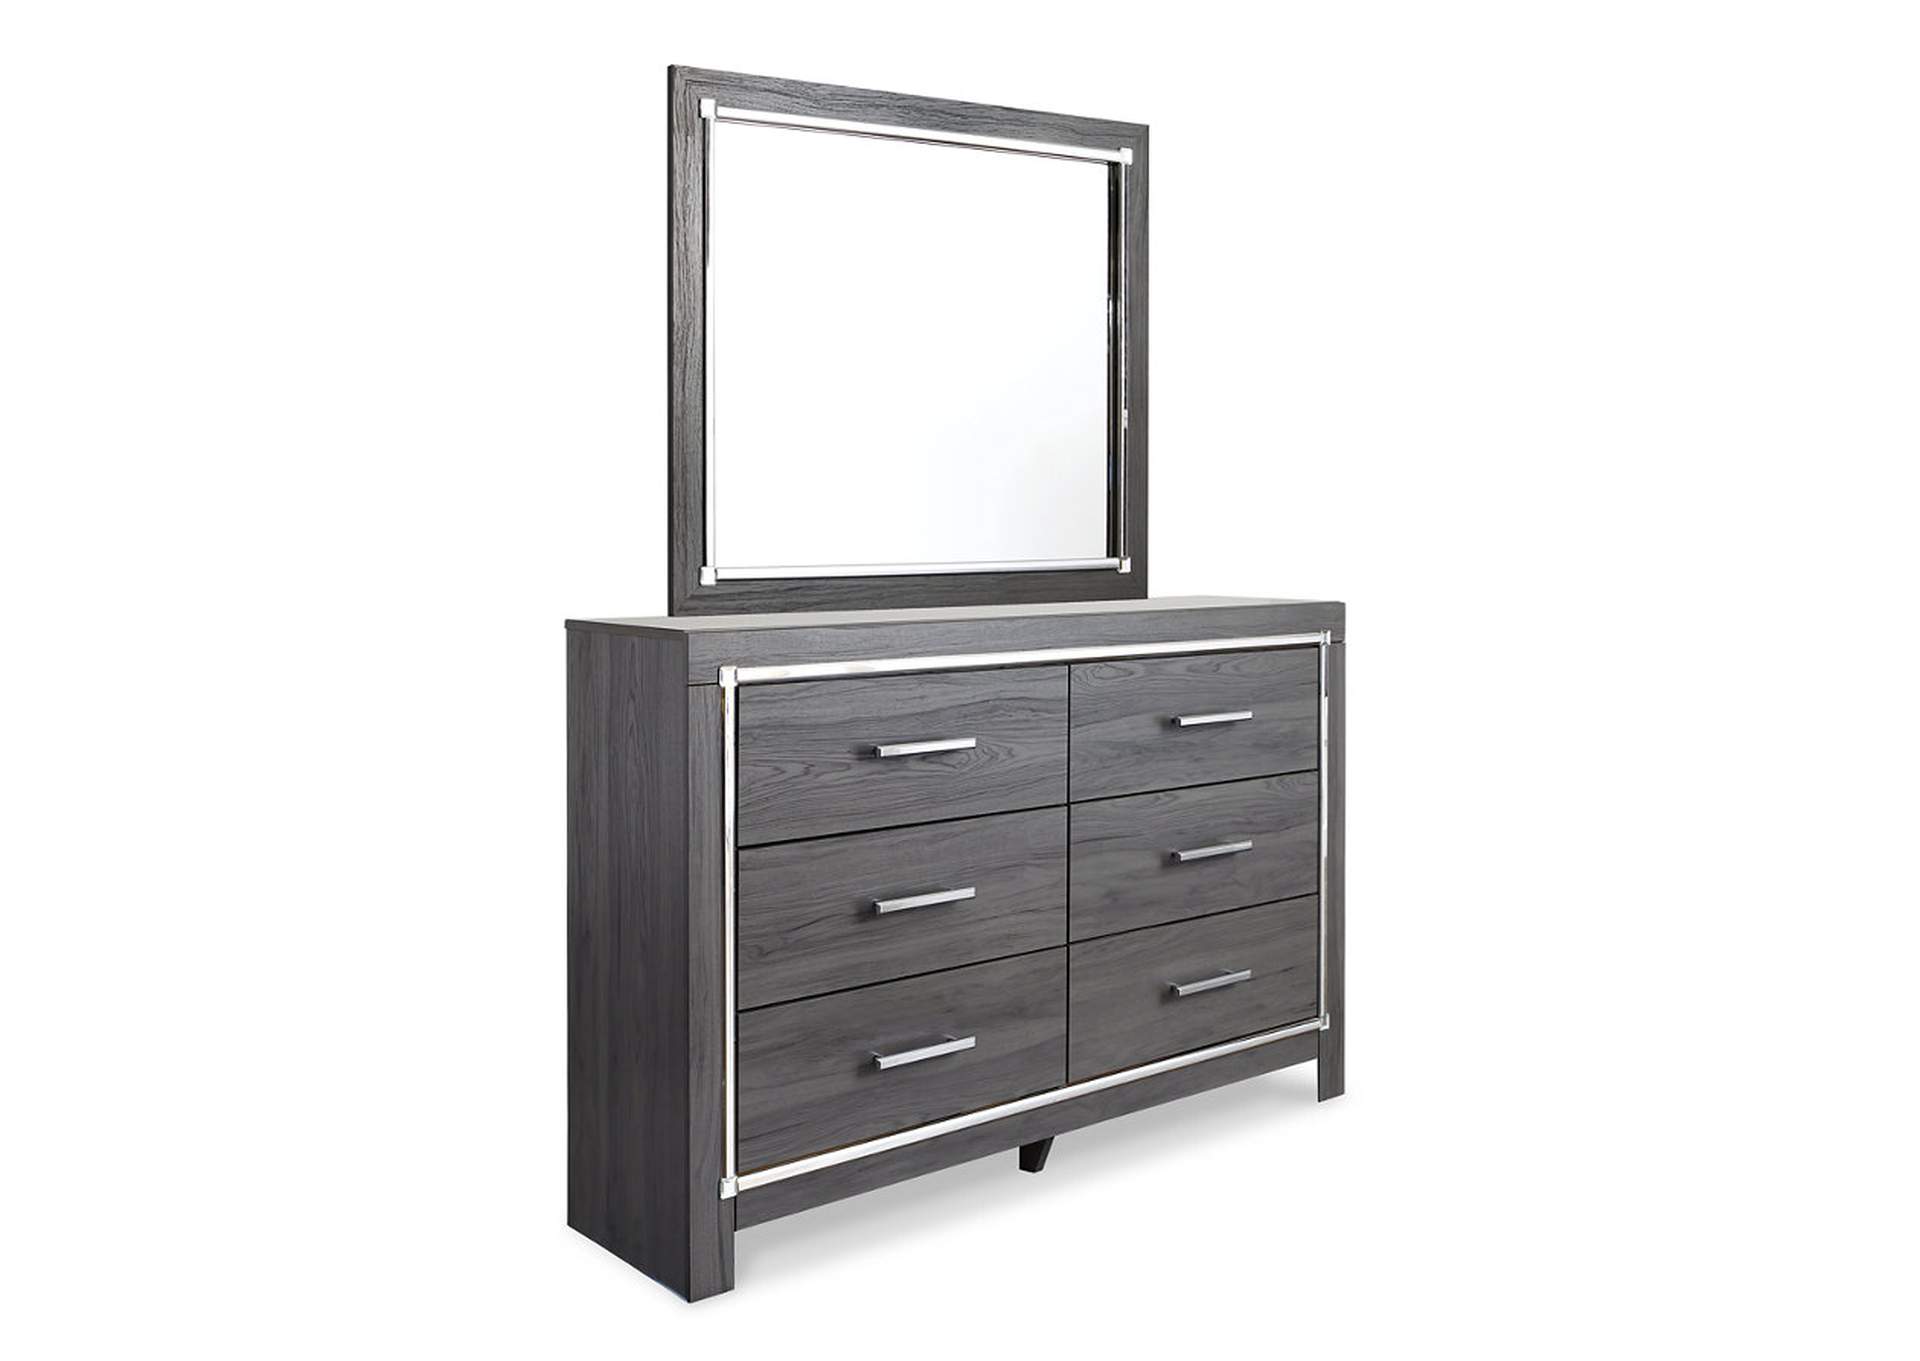 Lodanna King Panel Bed with Mirrored Dresser and Nightstand,Signature Design By Ashley